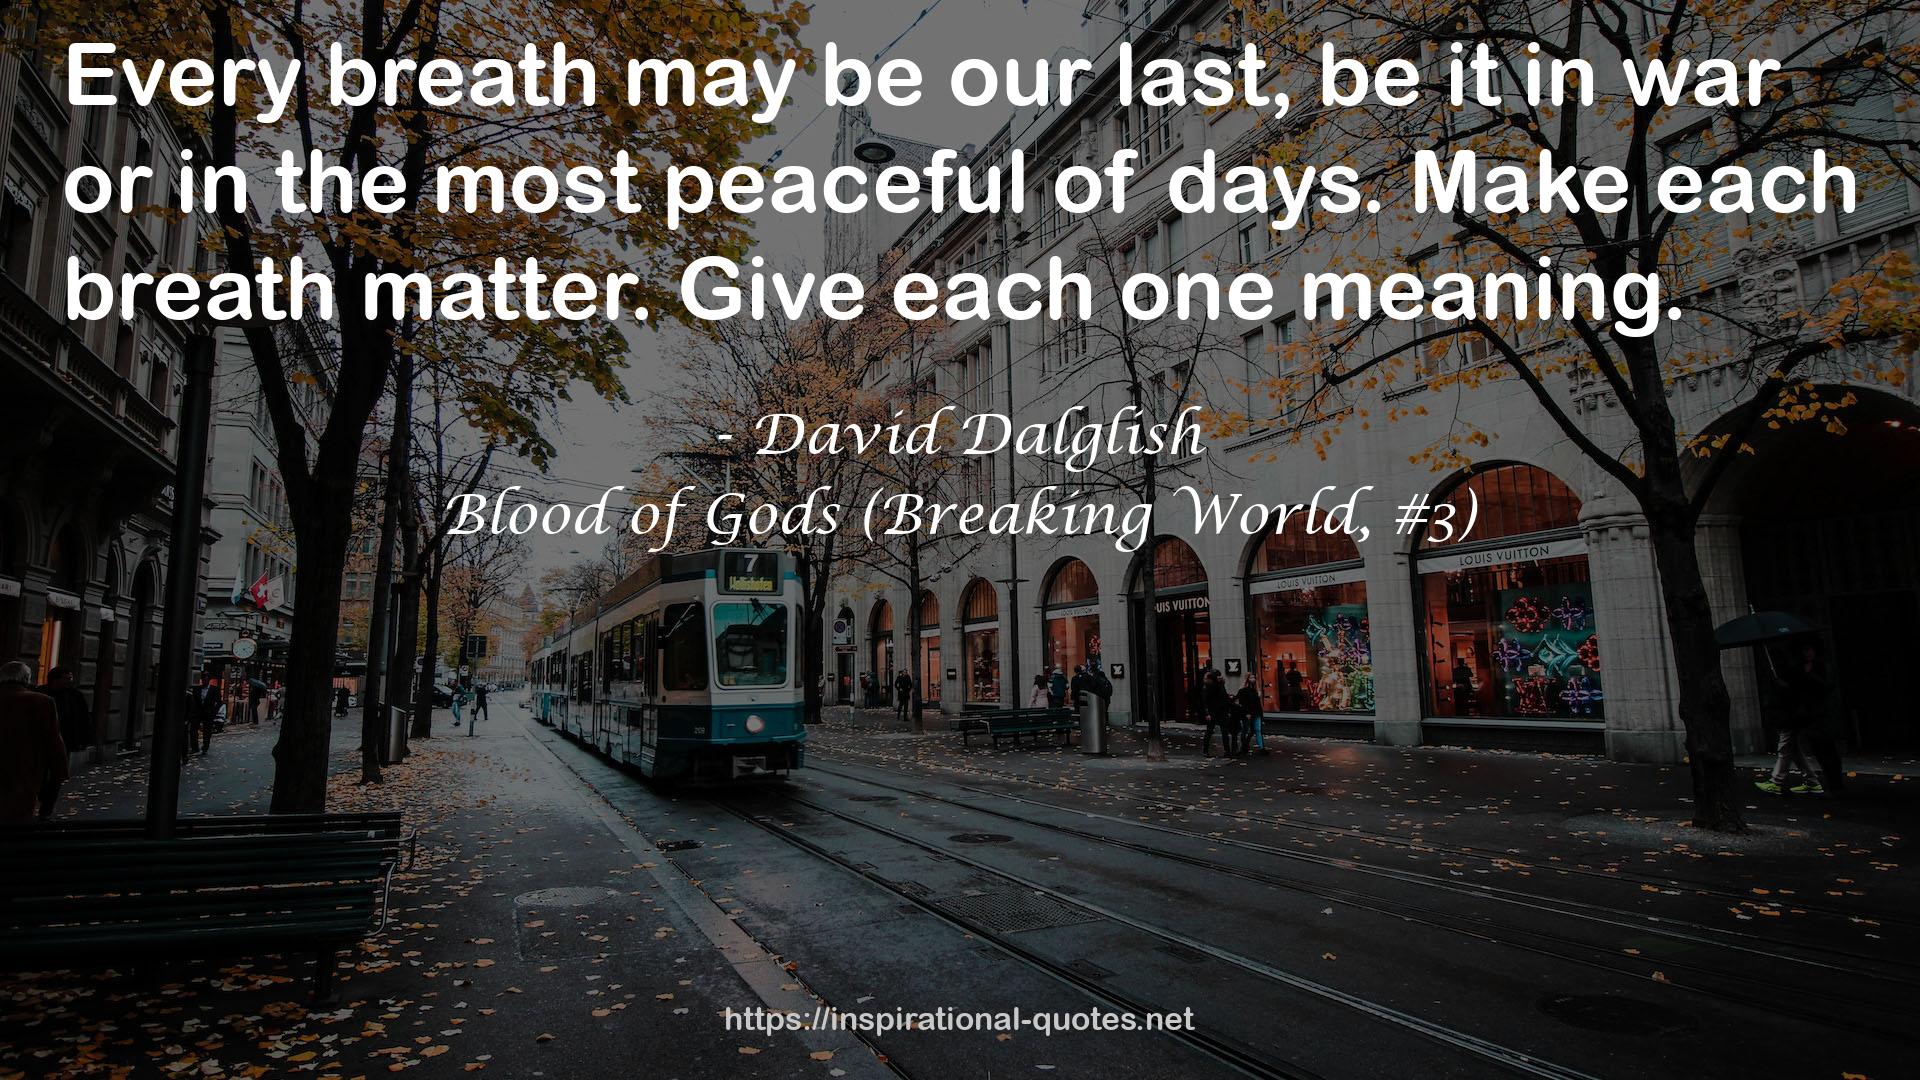 Blood of Gods (Breaking World, #3) QUOTES